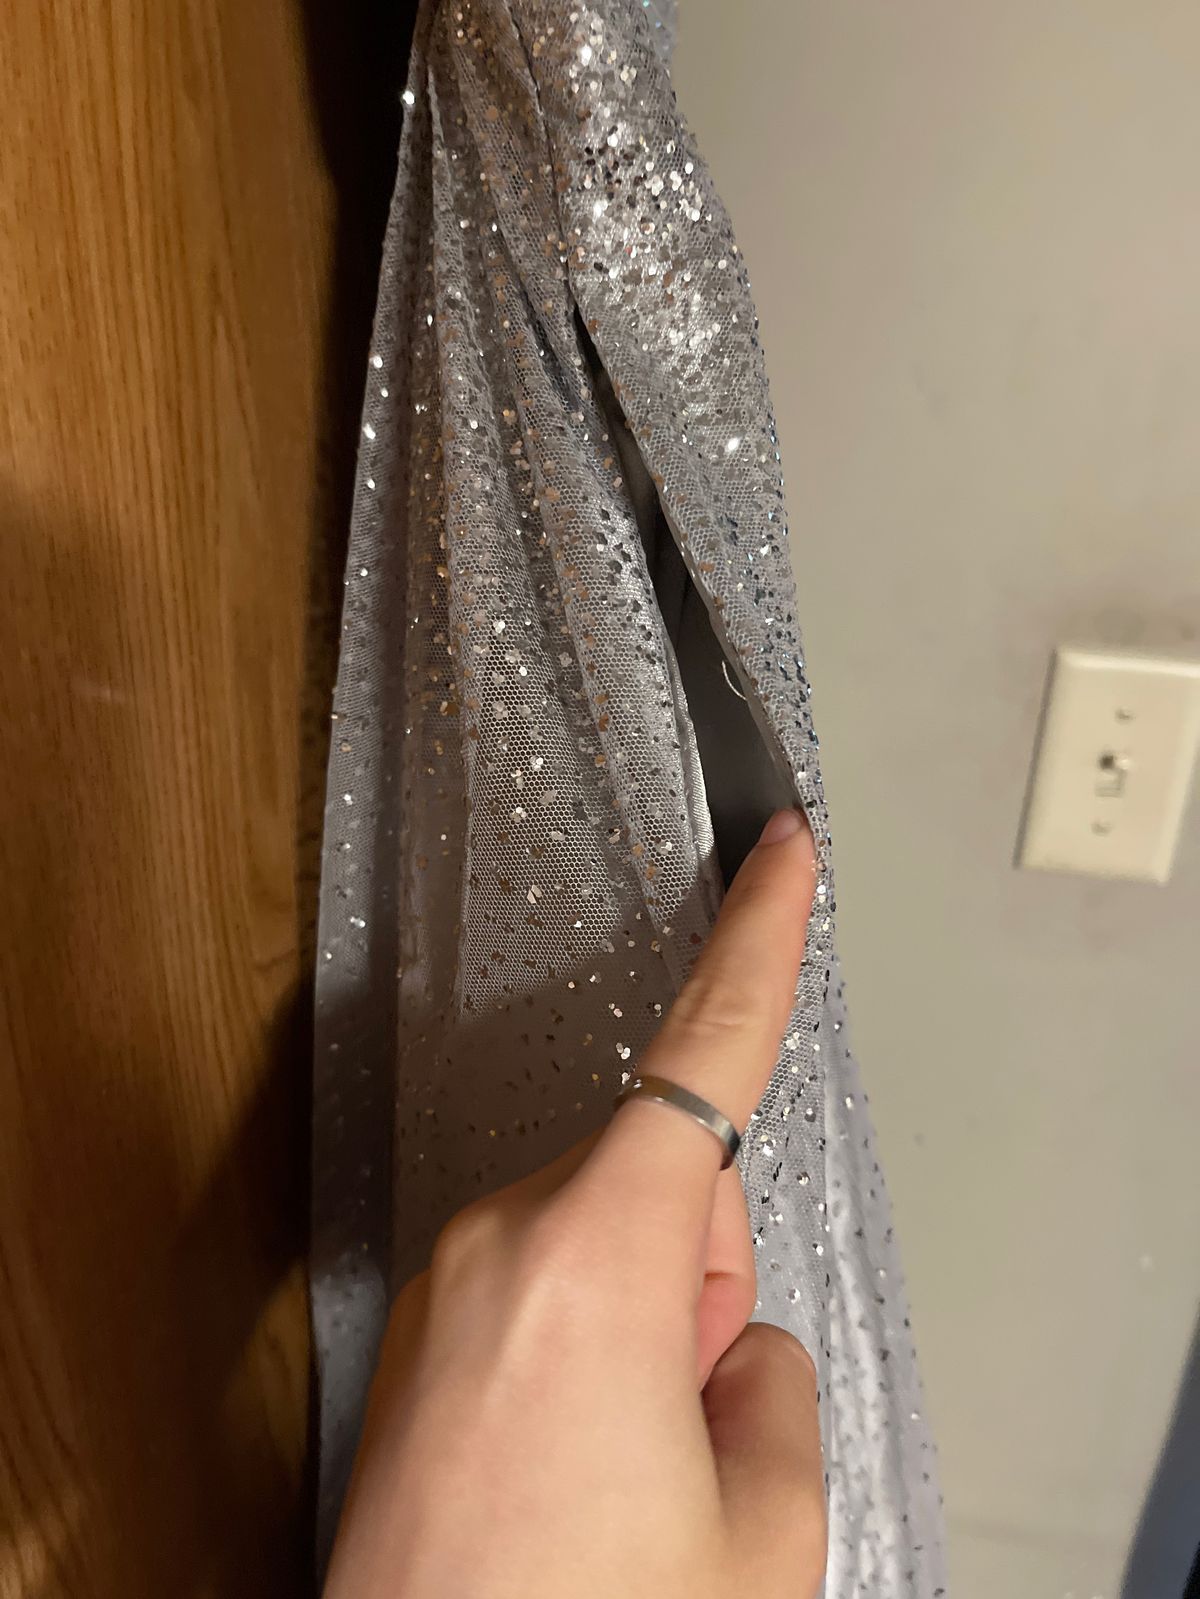 Size 6 Prom Silver A-line Dress on Queenly